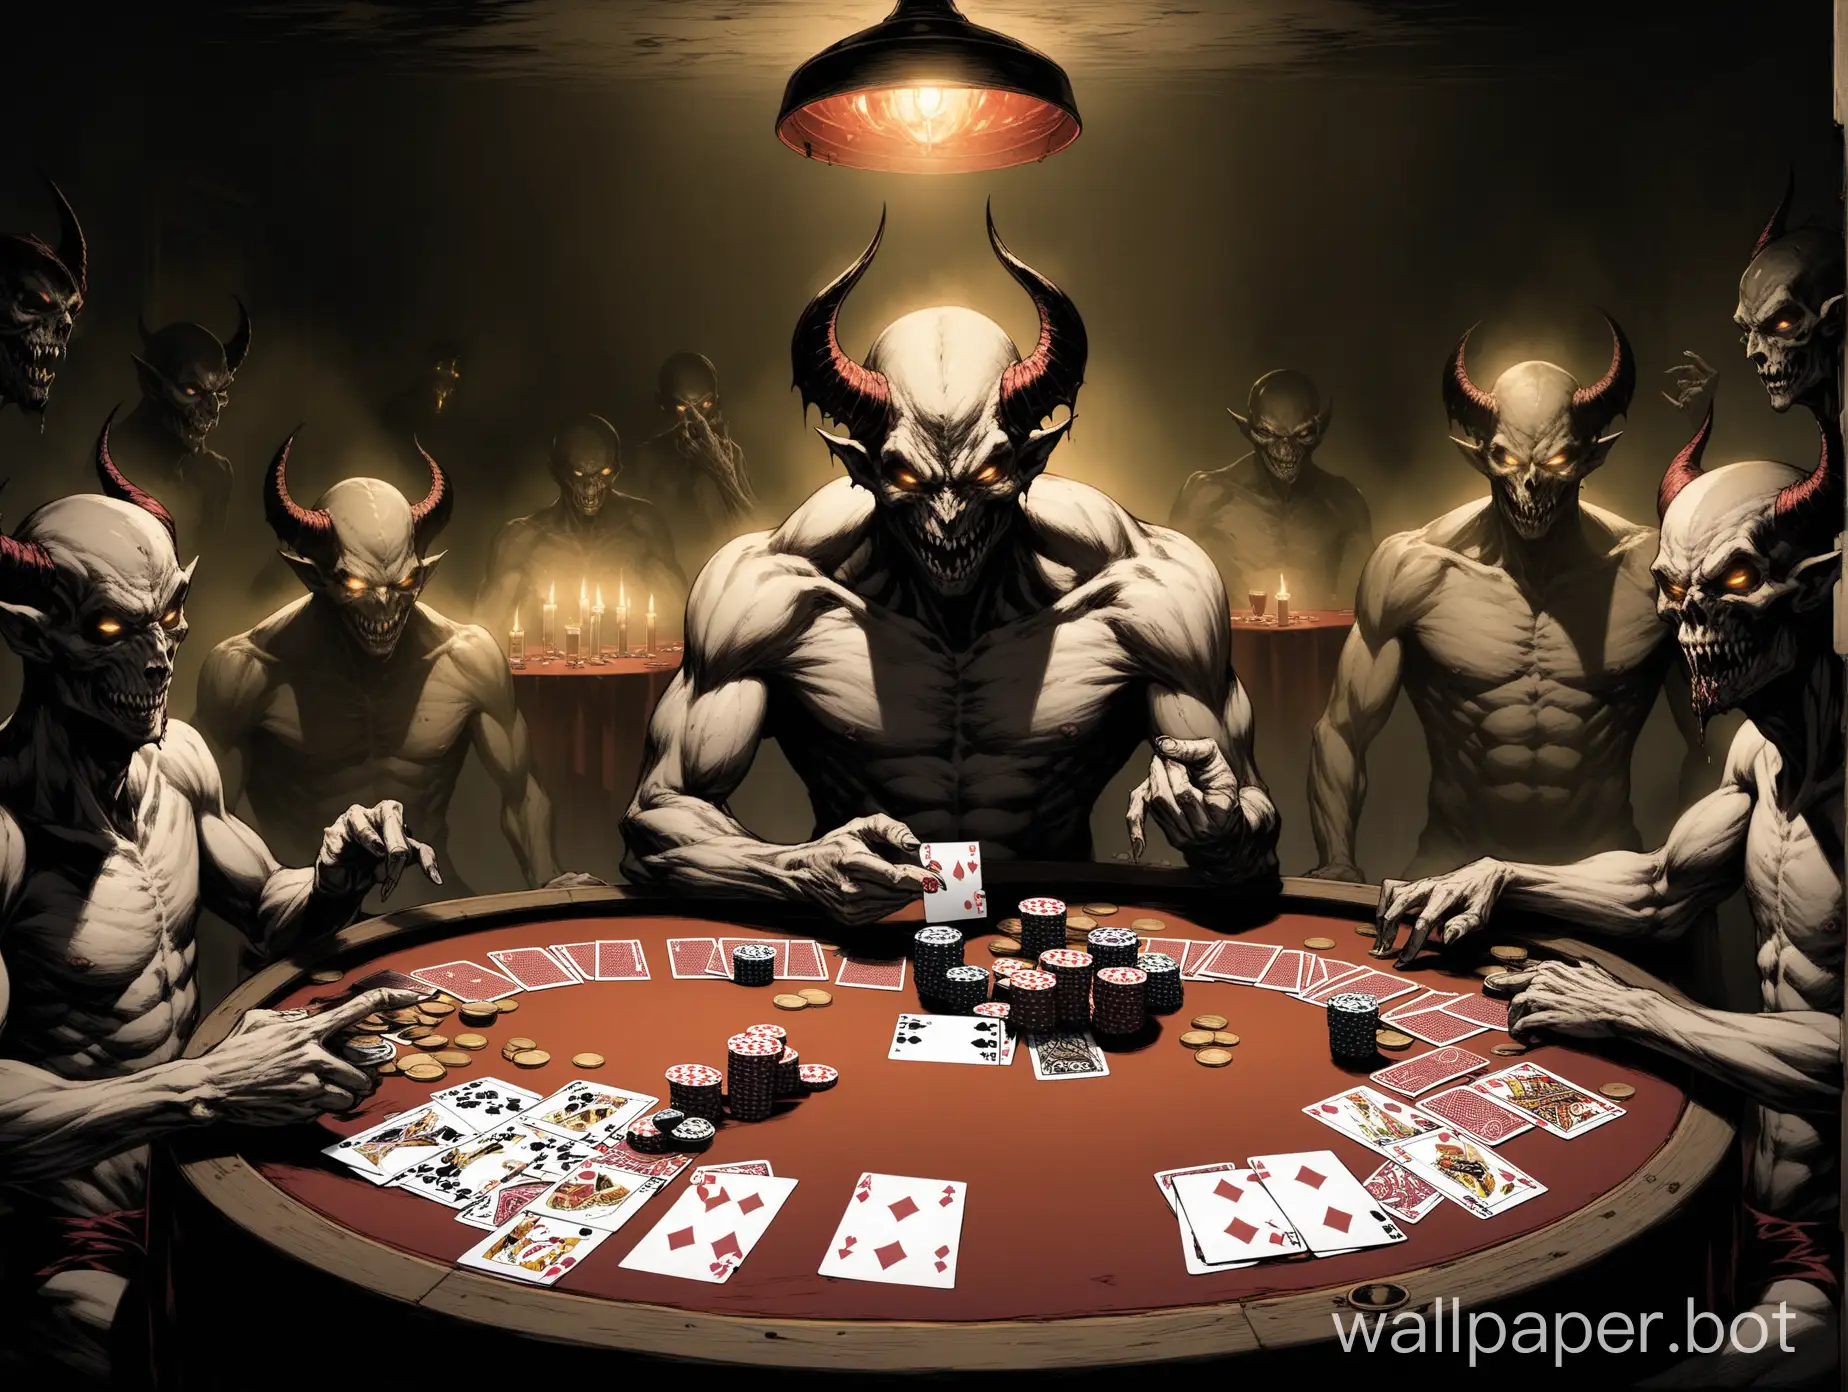 In a gloomy, shadowy room punctuated by a dim, ominous light, eight demonic figures sit at a weathered poker table. Each of these creatures is a grotesque distortion of the human form, their bodies twisted and distorted by the forces of the addictions they represent.

At the head of the table sits the demon of gambling addiction, whose eyes glow with greed and whose hands impatiently shuffle the cards. His figure is covered with playing coins and playing cards, symbols of the destructive obsession that dominates his being.

On his right side sits the demon of anorexia, a gaunt and emaciated figure, his skin stretched taut over his bones. In one hand he holds a scale, symbolizing the constant obsession with weight control and self-denial.

Opposite, at the other end of the table, sits the demon of lust, whose fleshly form is distorted by an insatiable desire. His eyes glow with libidinous desire as he lasciviously puffs on a cigar and makes obscene gestures.

At his side sits the demon of social media addiction, his distorted face dominated by a smartphone whose screen emits a hypnotizing glow. His fingers are covered in bloody scratches, relics of his constant search for validation and recognition in the virtual world.

The other demons, each with their own frightening display, surround the table, filling the room with an aura of despair and depravity. Clouds of smoke and the smell of alcohol hang in the air as addictions unite in a deadly dance, ready to devour the souls of those who have fallen for them. An image of horror and destruction that fills the viewer with fear and disgust and allows them to look into the dark depths of the human soul.